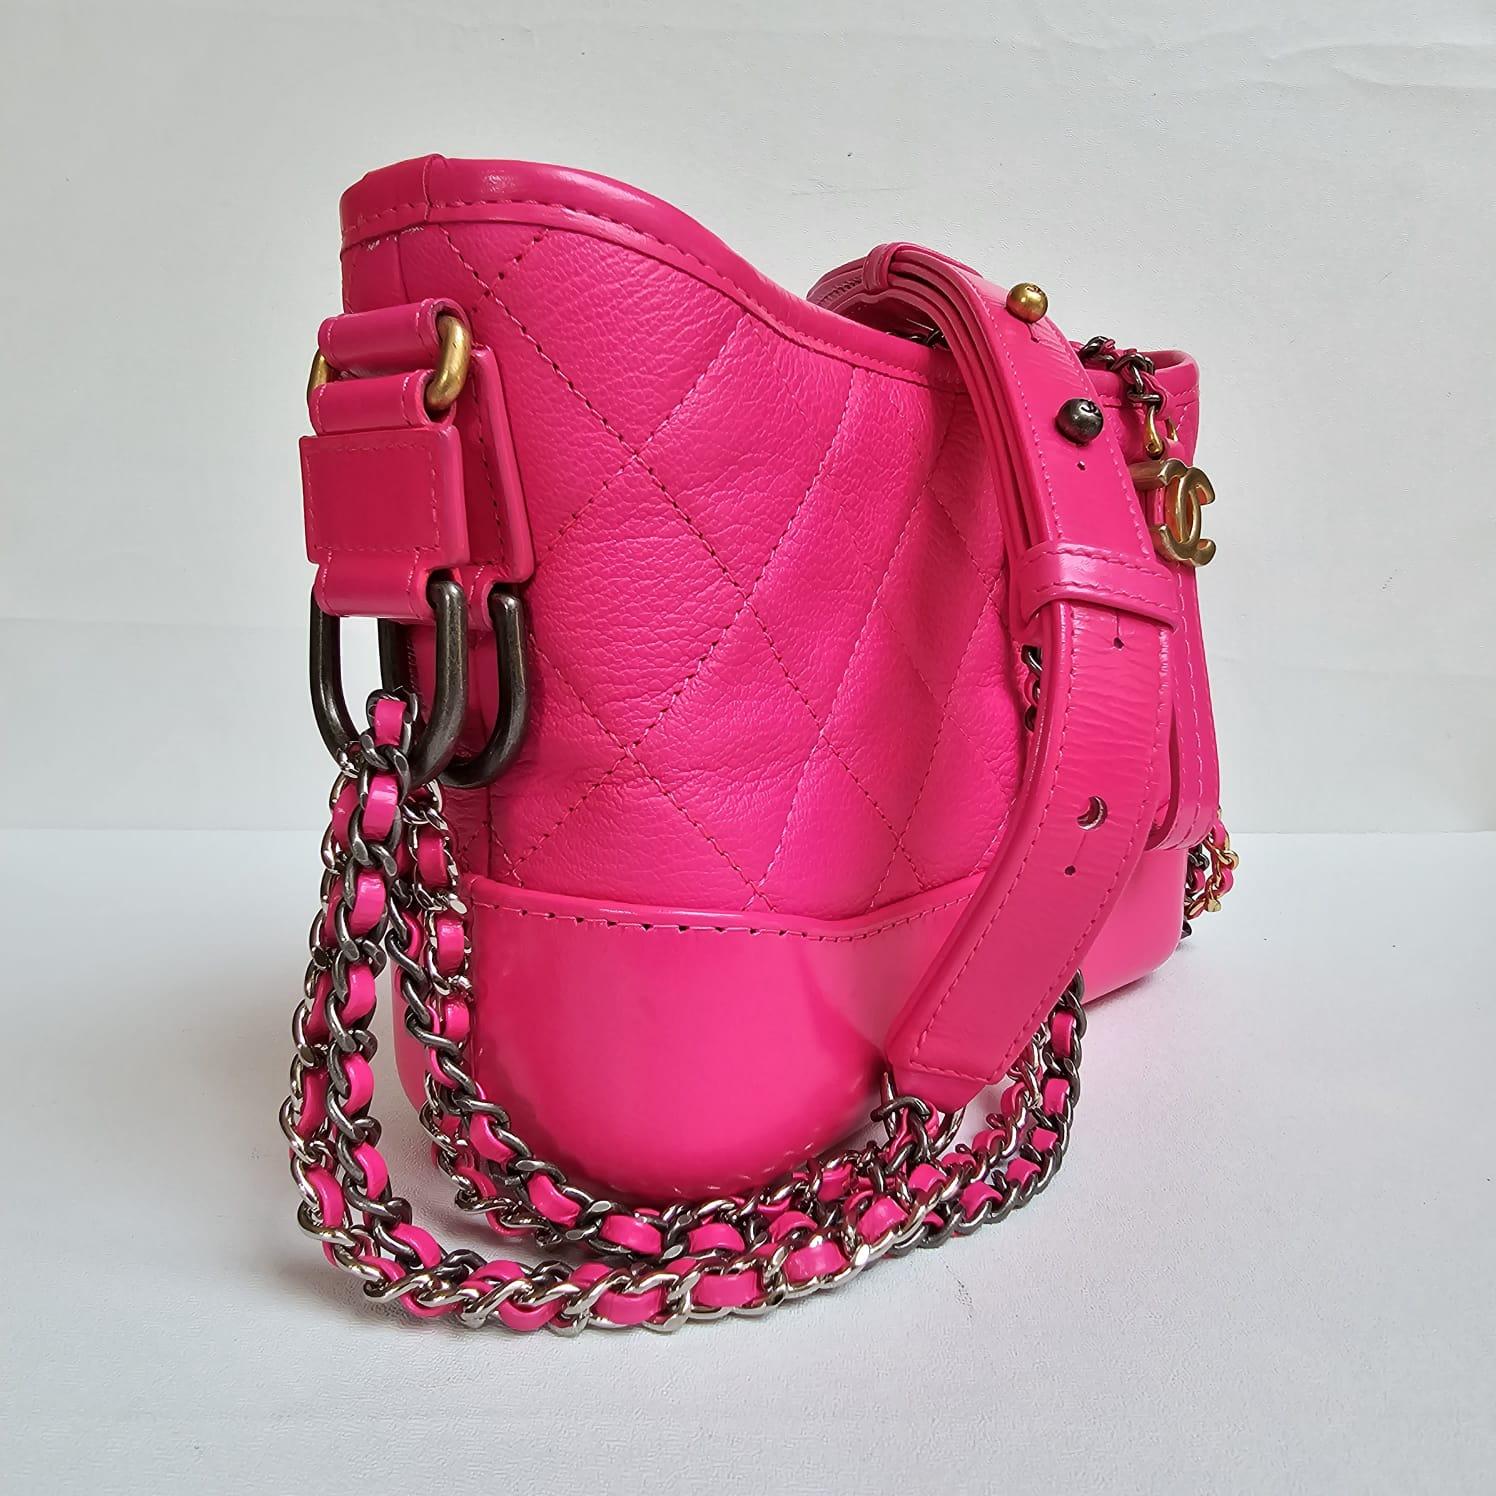 Chanel Neon Pink Small Gabrielle Bag For Sale 10